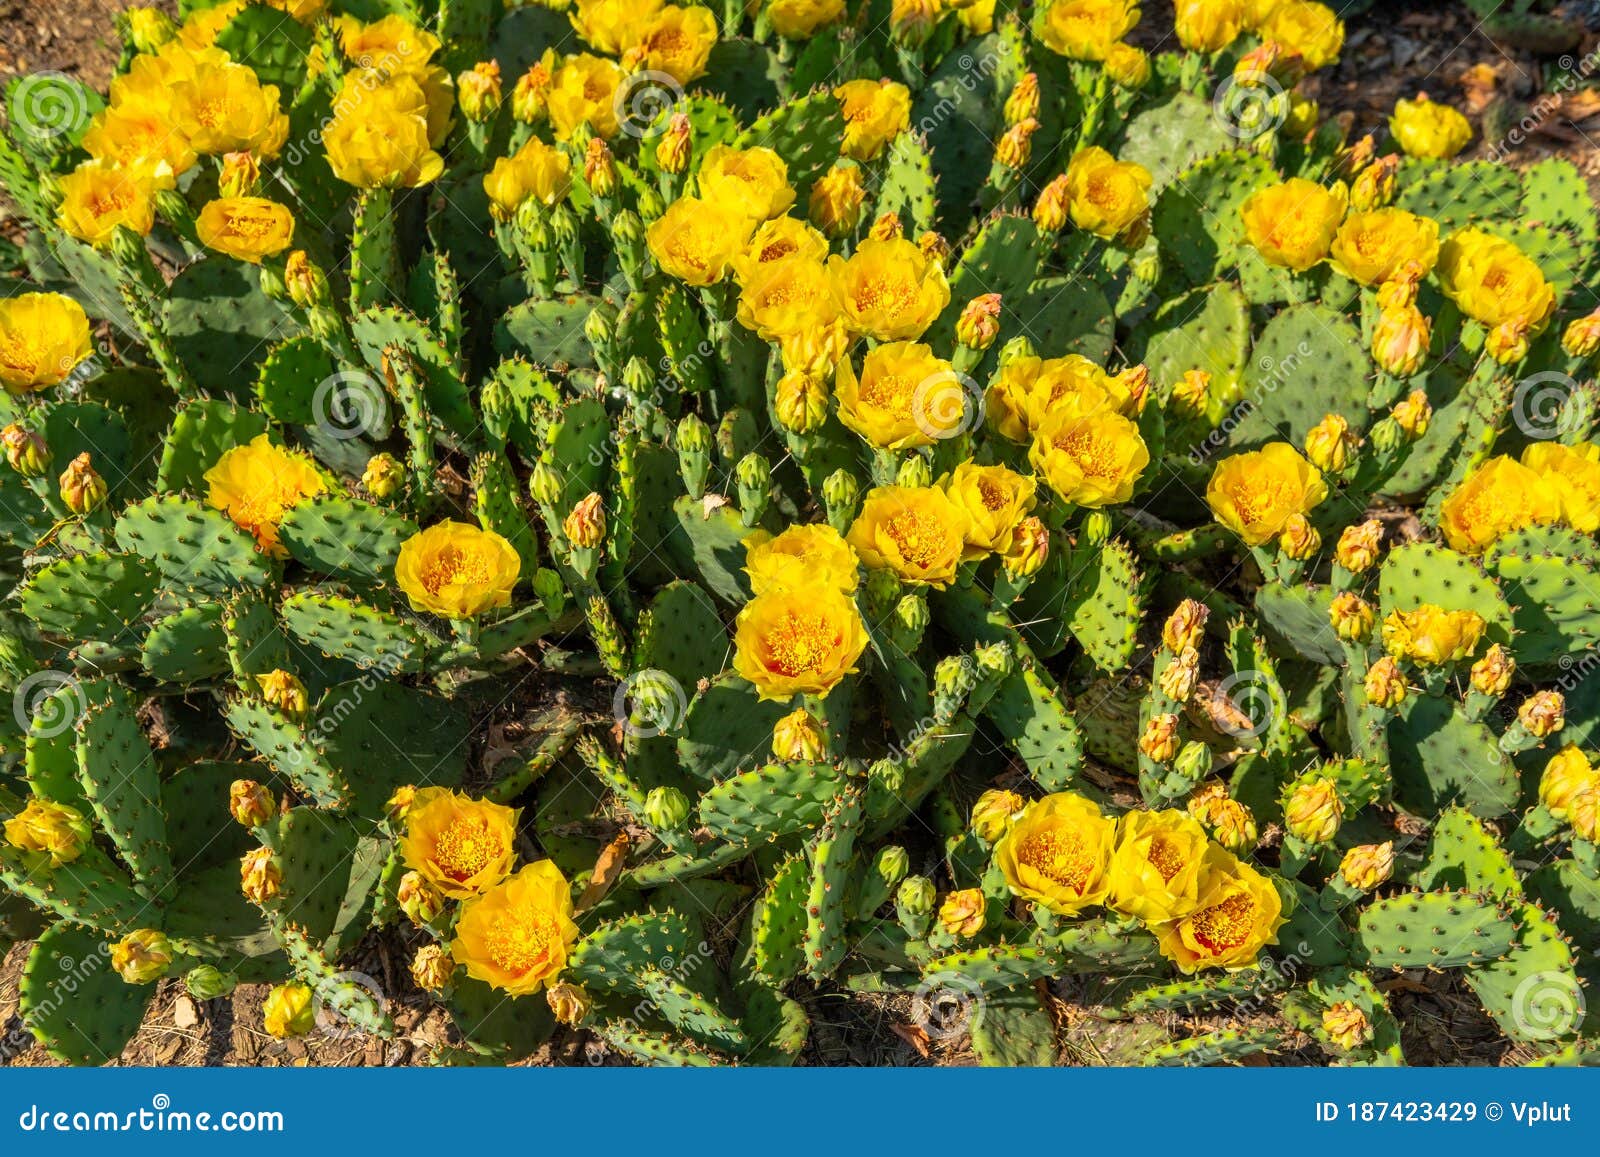 patch of prickly pear cactus in full bloom